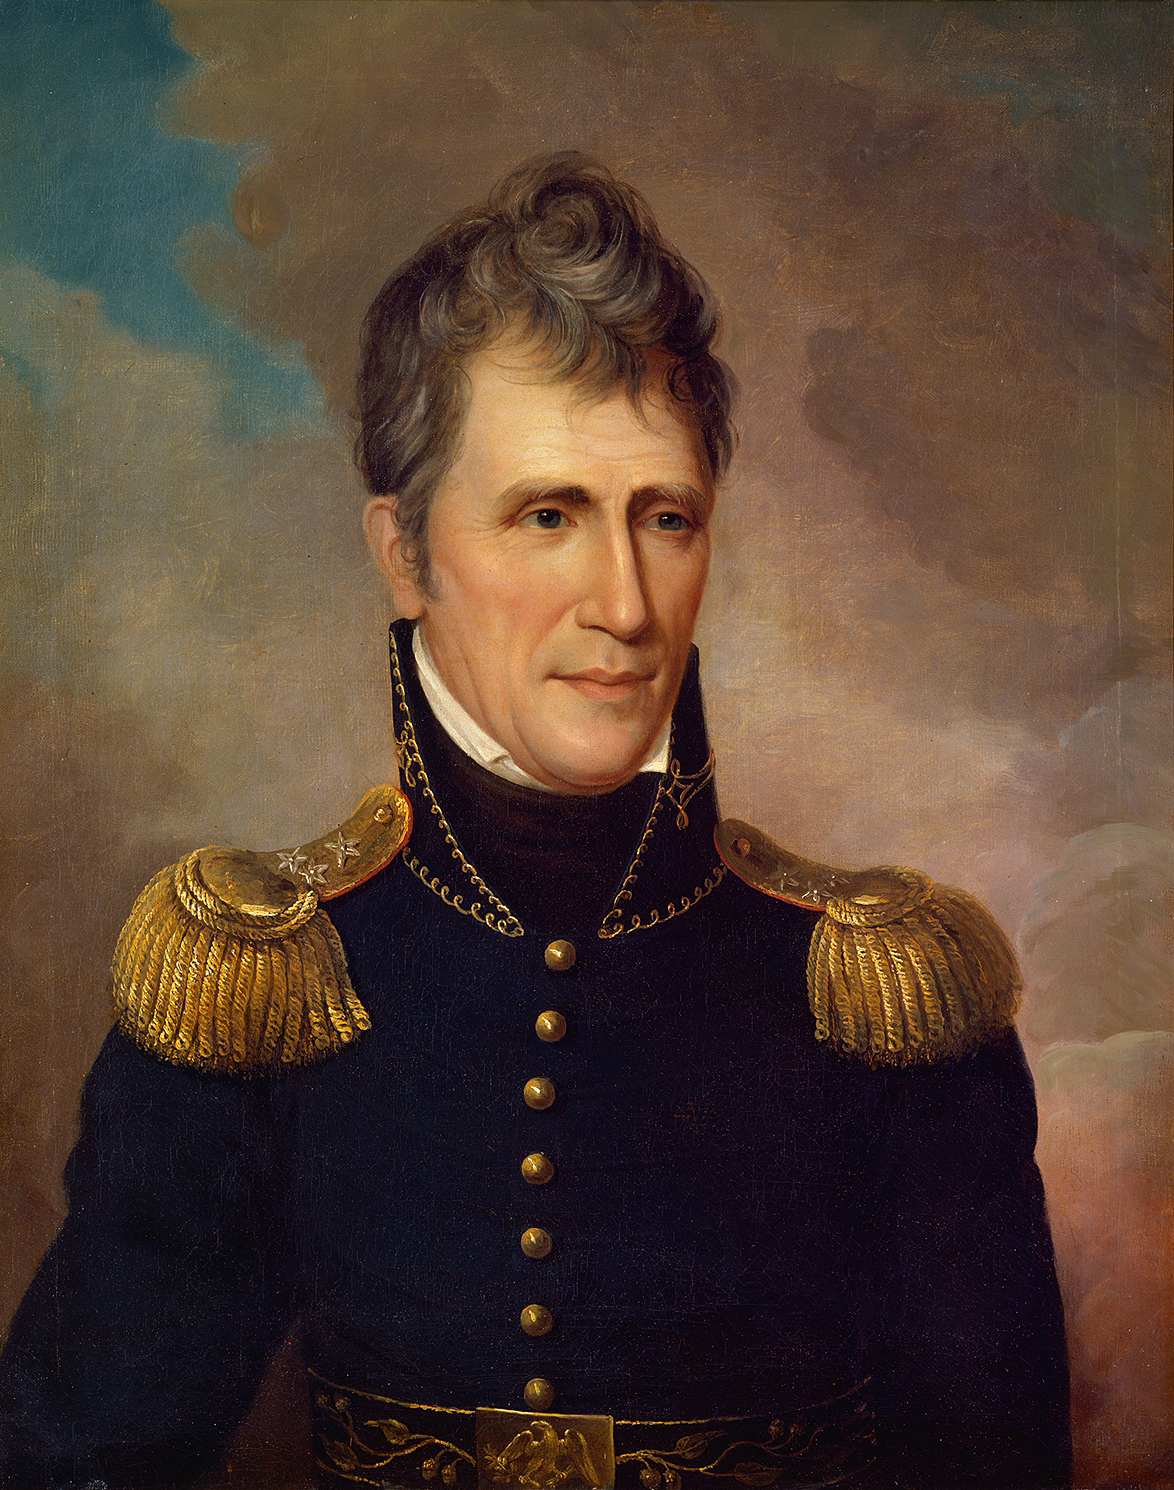 Andrew Jackson by Charles Willson Peale | Smithsonian Institution